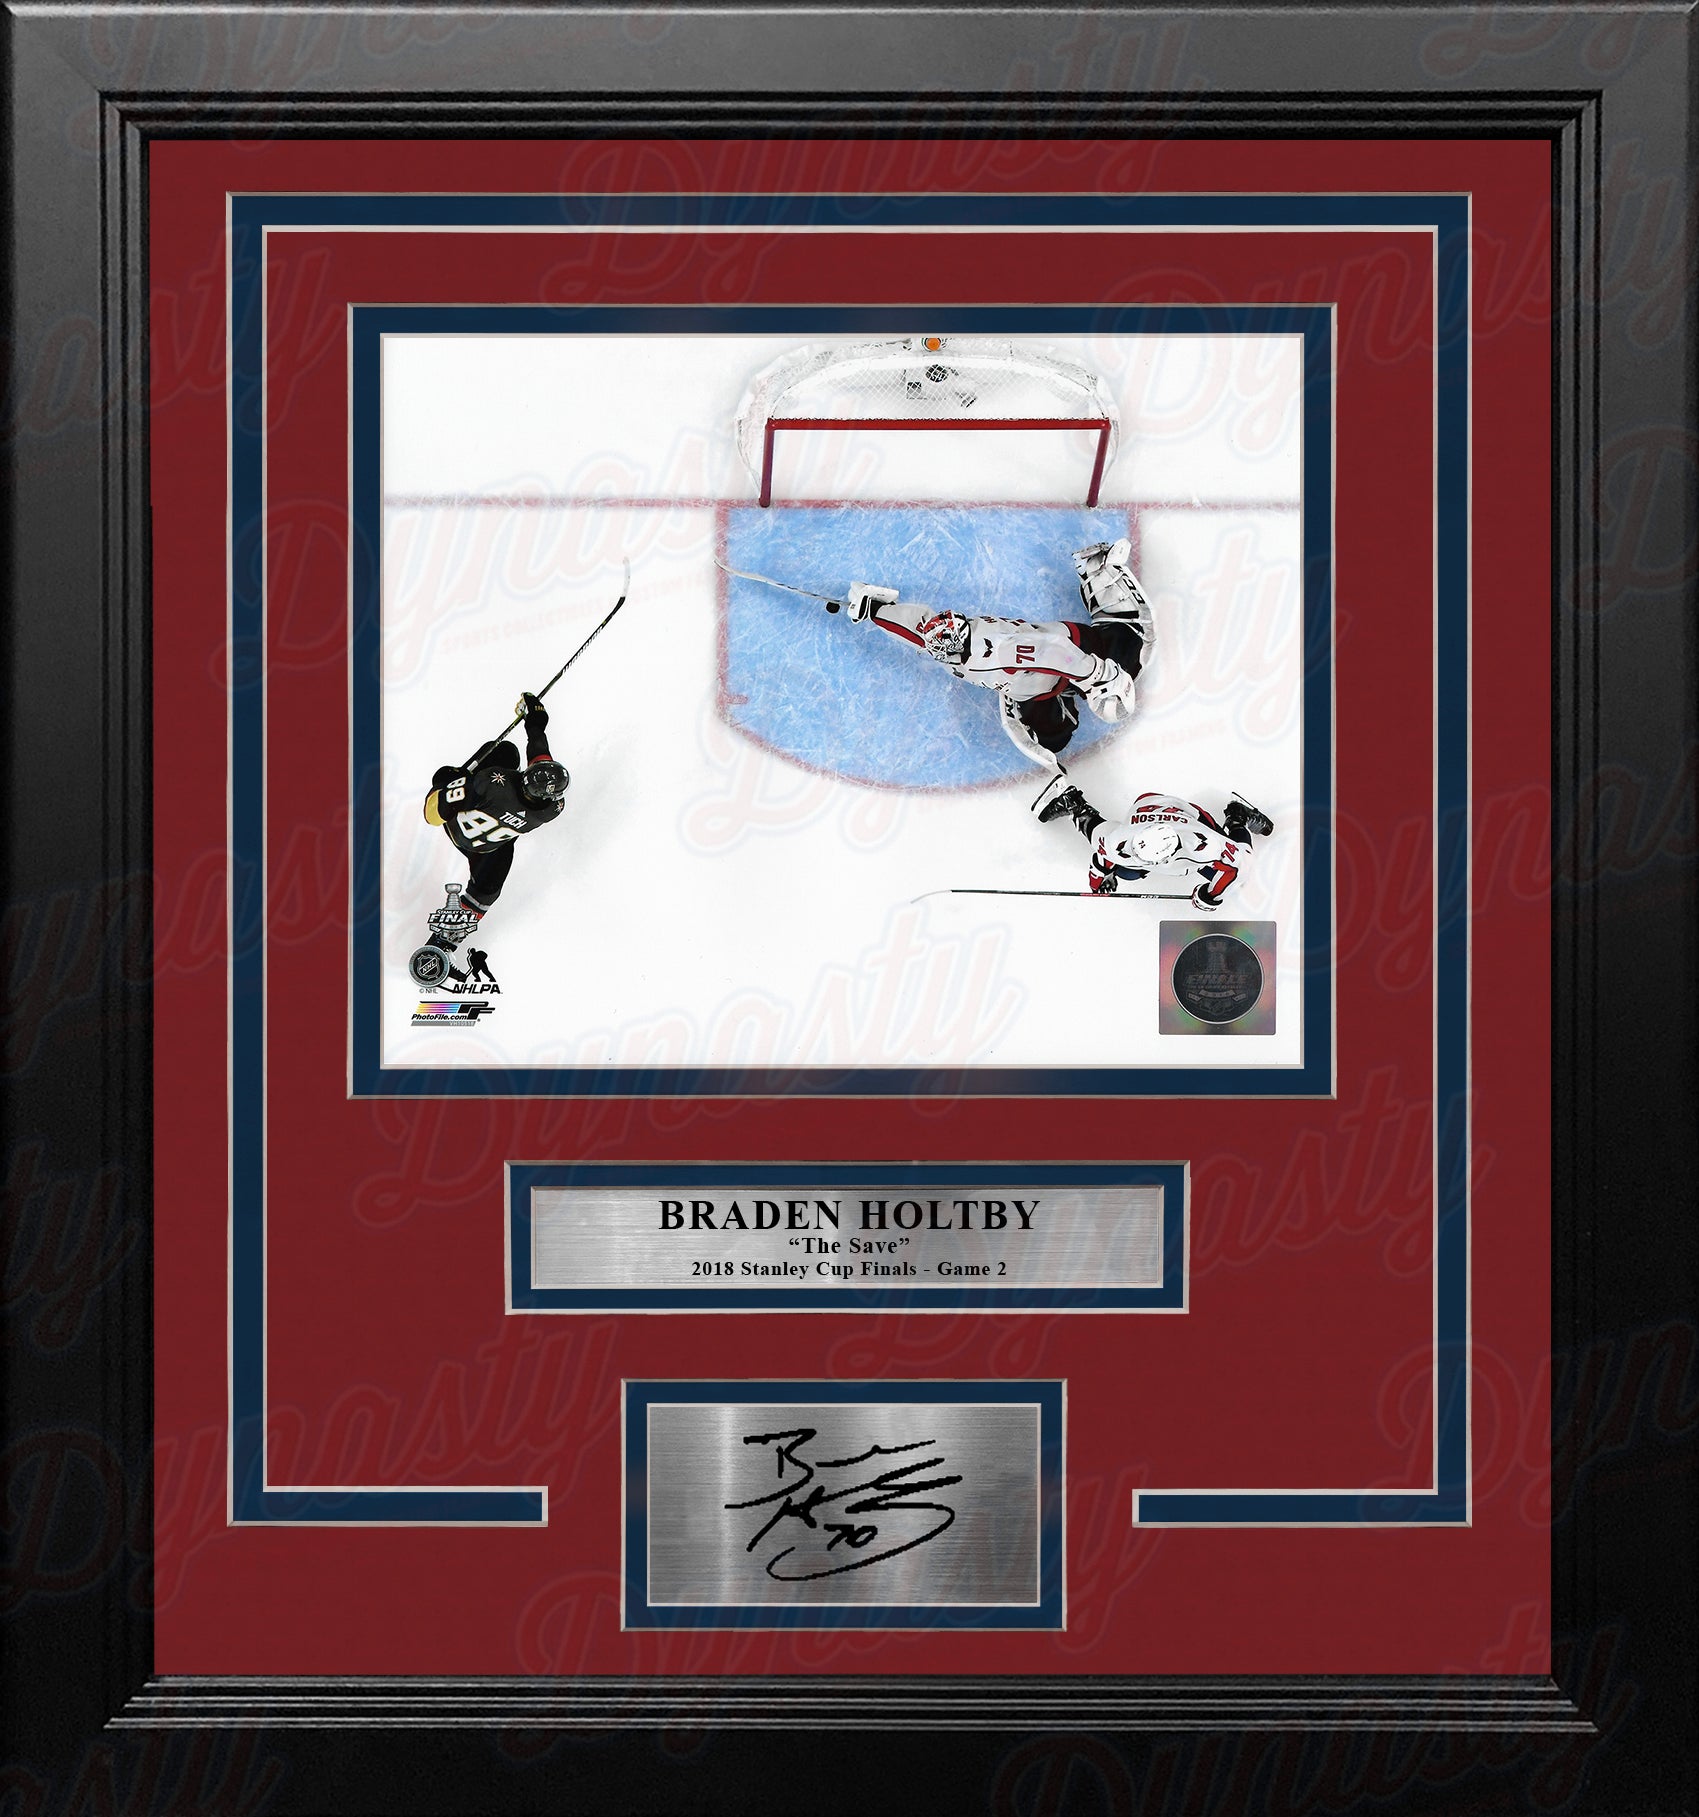 Braden Holtby 2018 Stanley Cup Finals Save Capitals 8x10 Framed Hockey Photo with Engraved Autograph - Dynasty Sports & Framing 